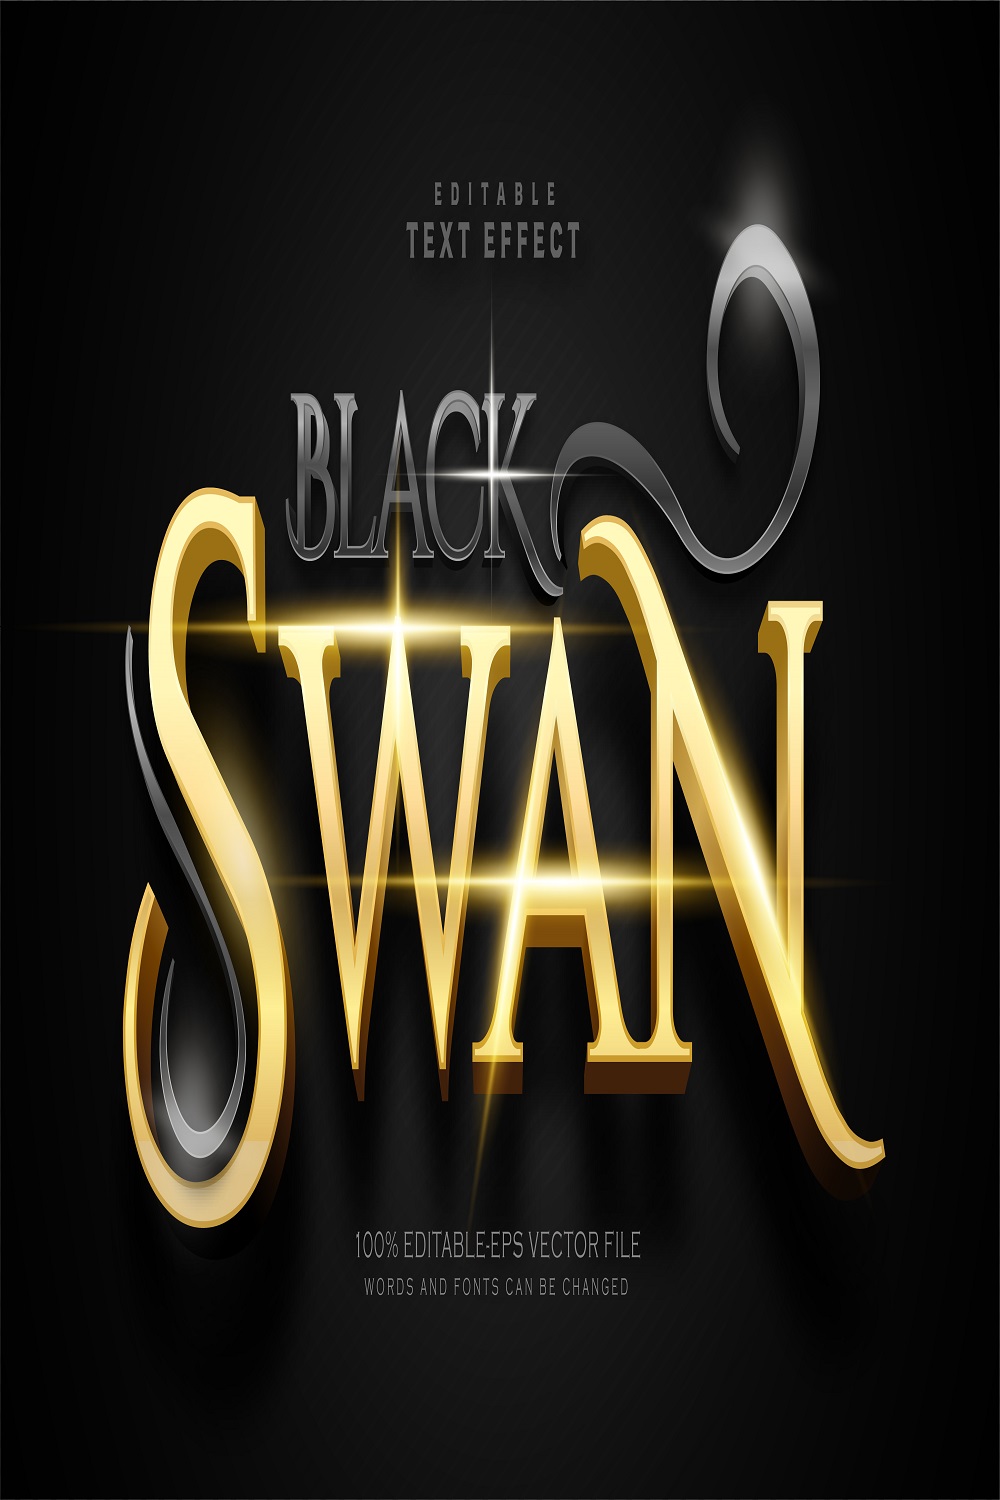 Black swan text effect pinterest preview image.